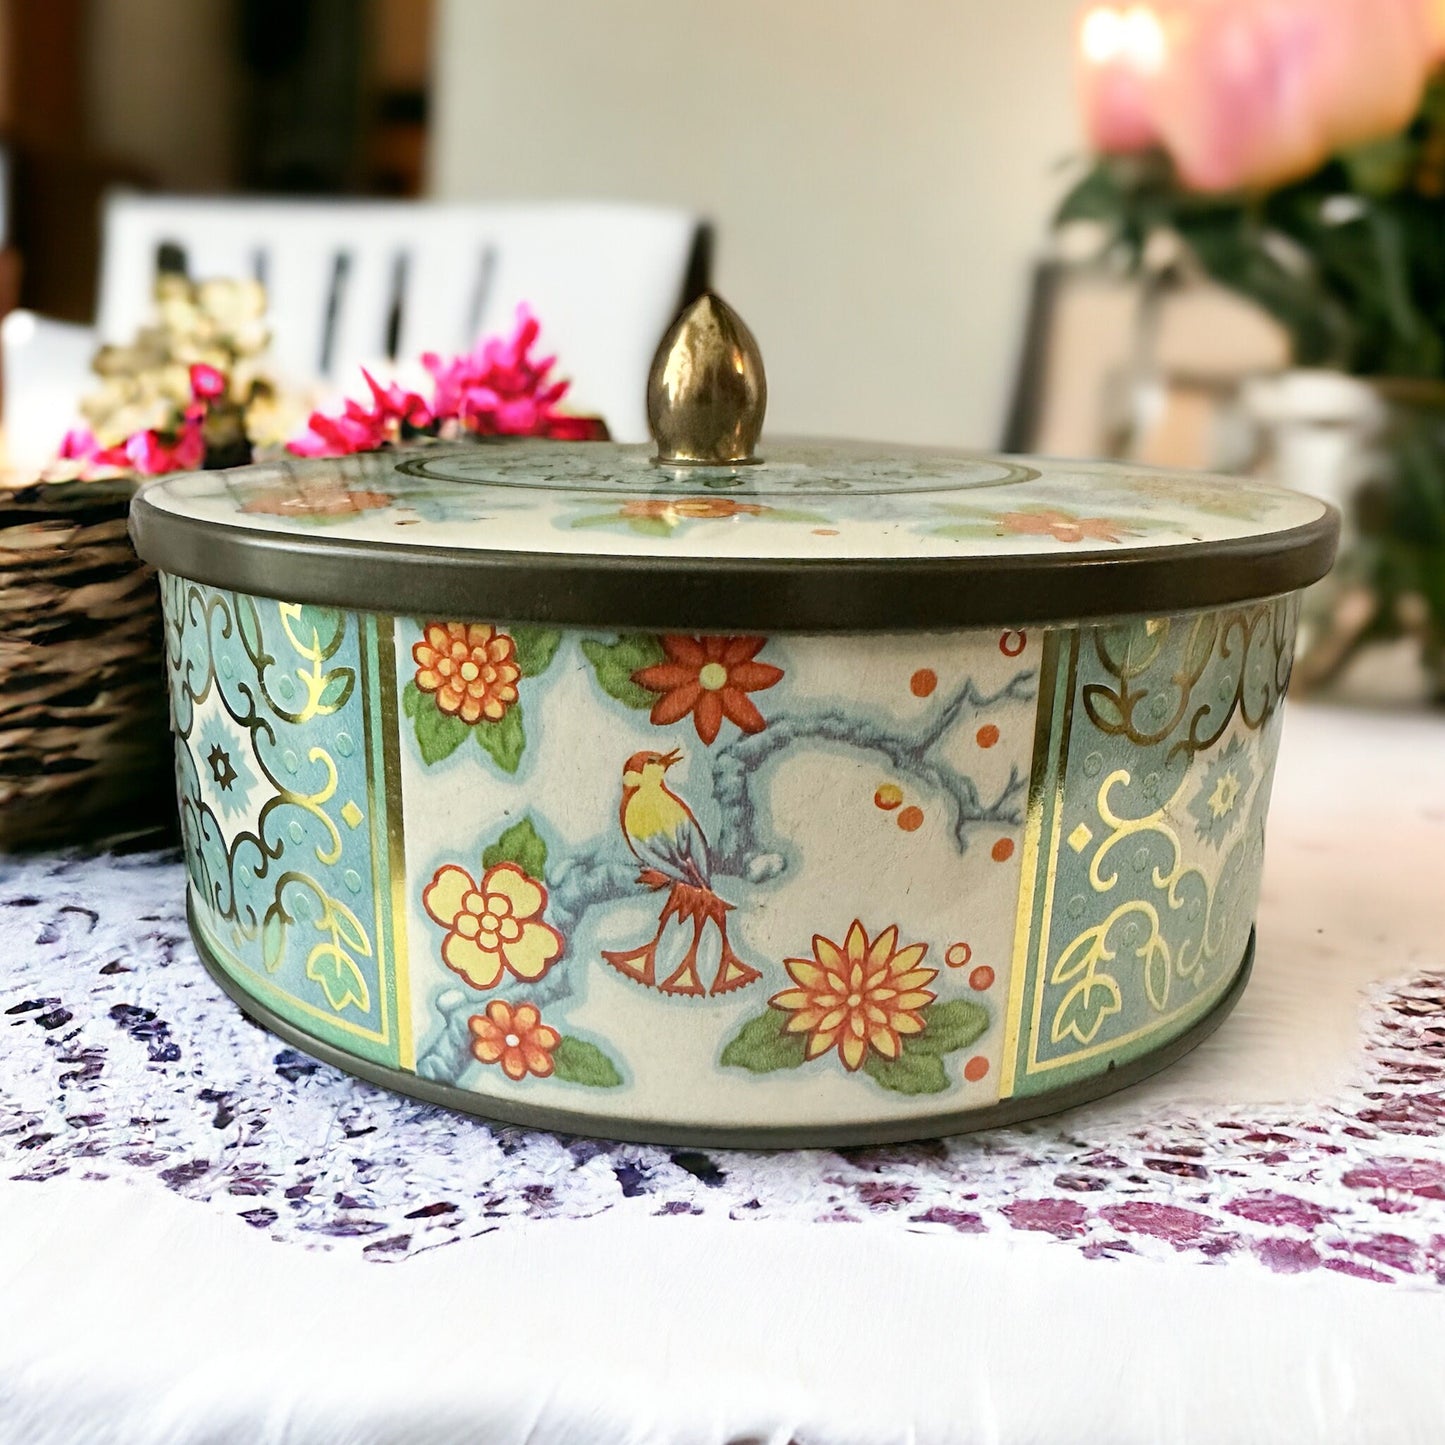 Scented Candle, Vintage Tins, Mothers Day Gifts, Spring Decor